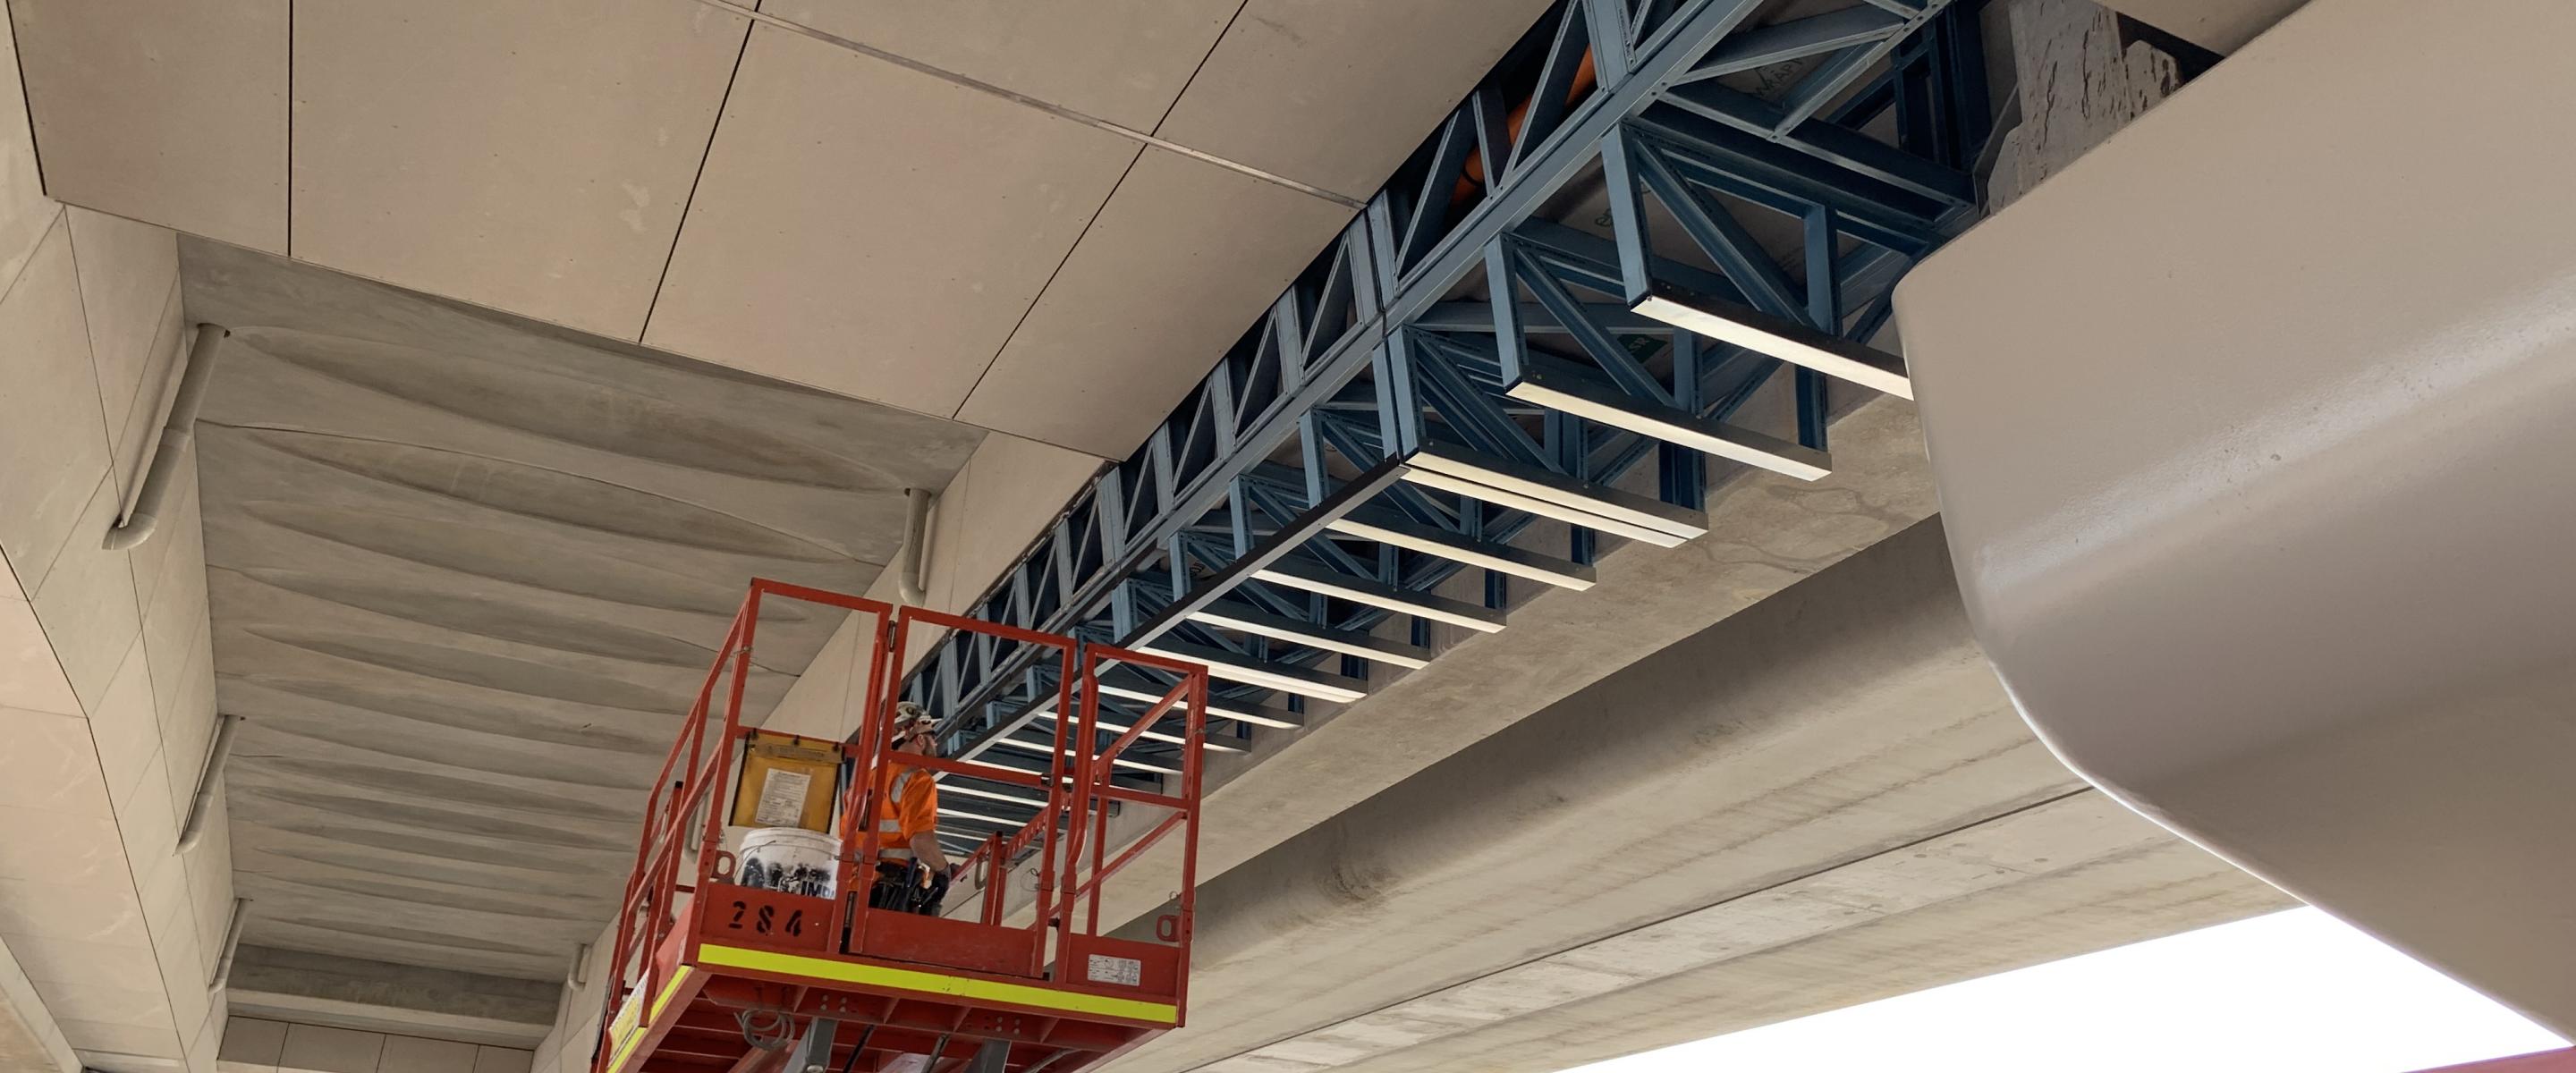 Framing made from TRUECORE® steel underpins the form and function of Victoria’s new ground breaking rail stations